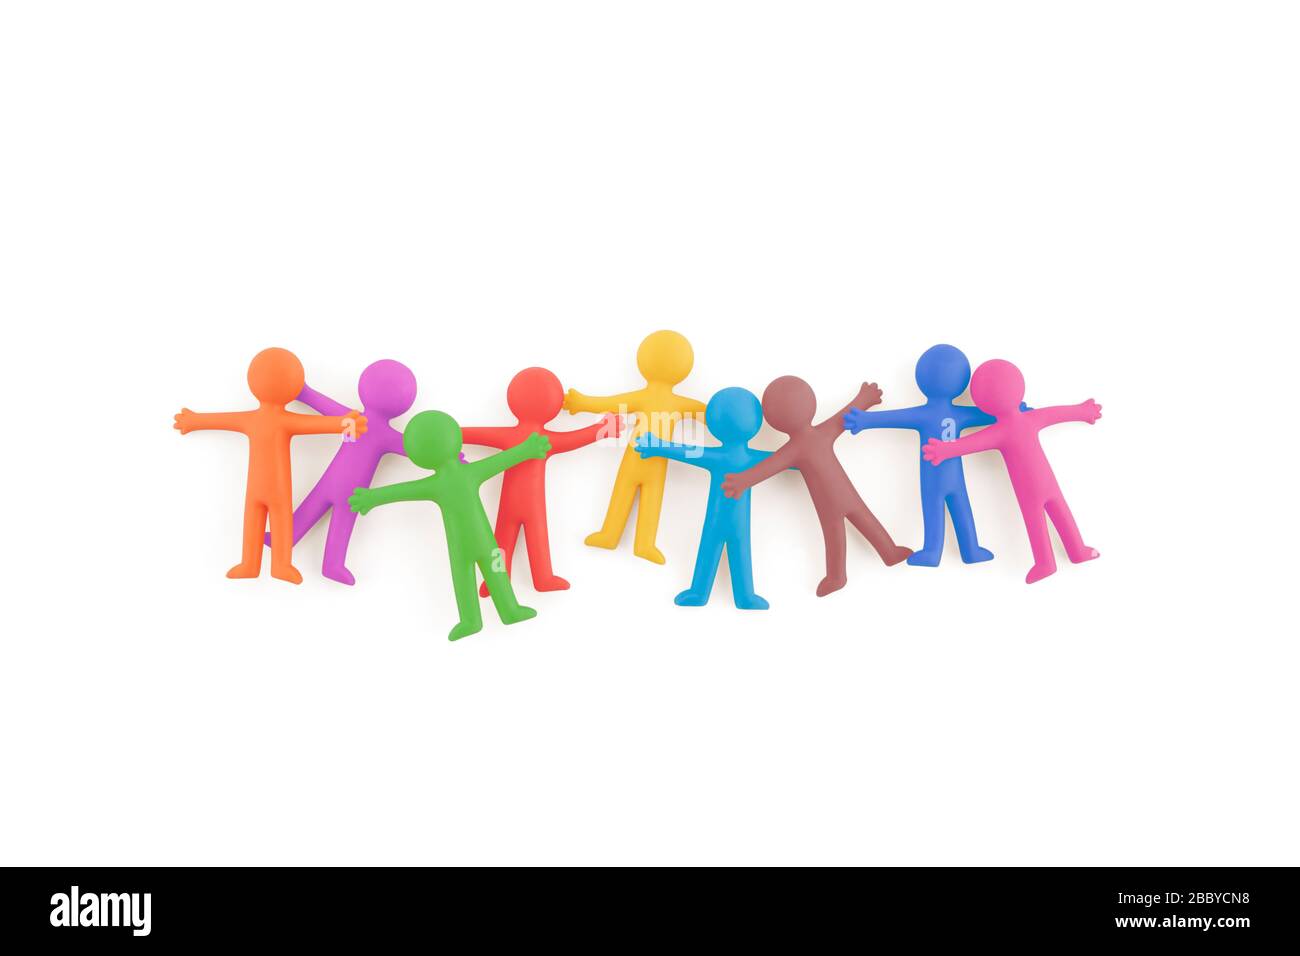 Group of colorful people figures sticking together on white background with clipping path Stock Photo